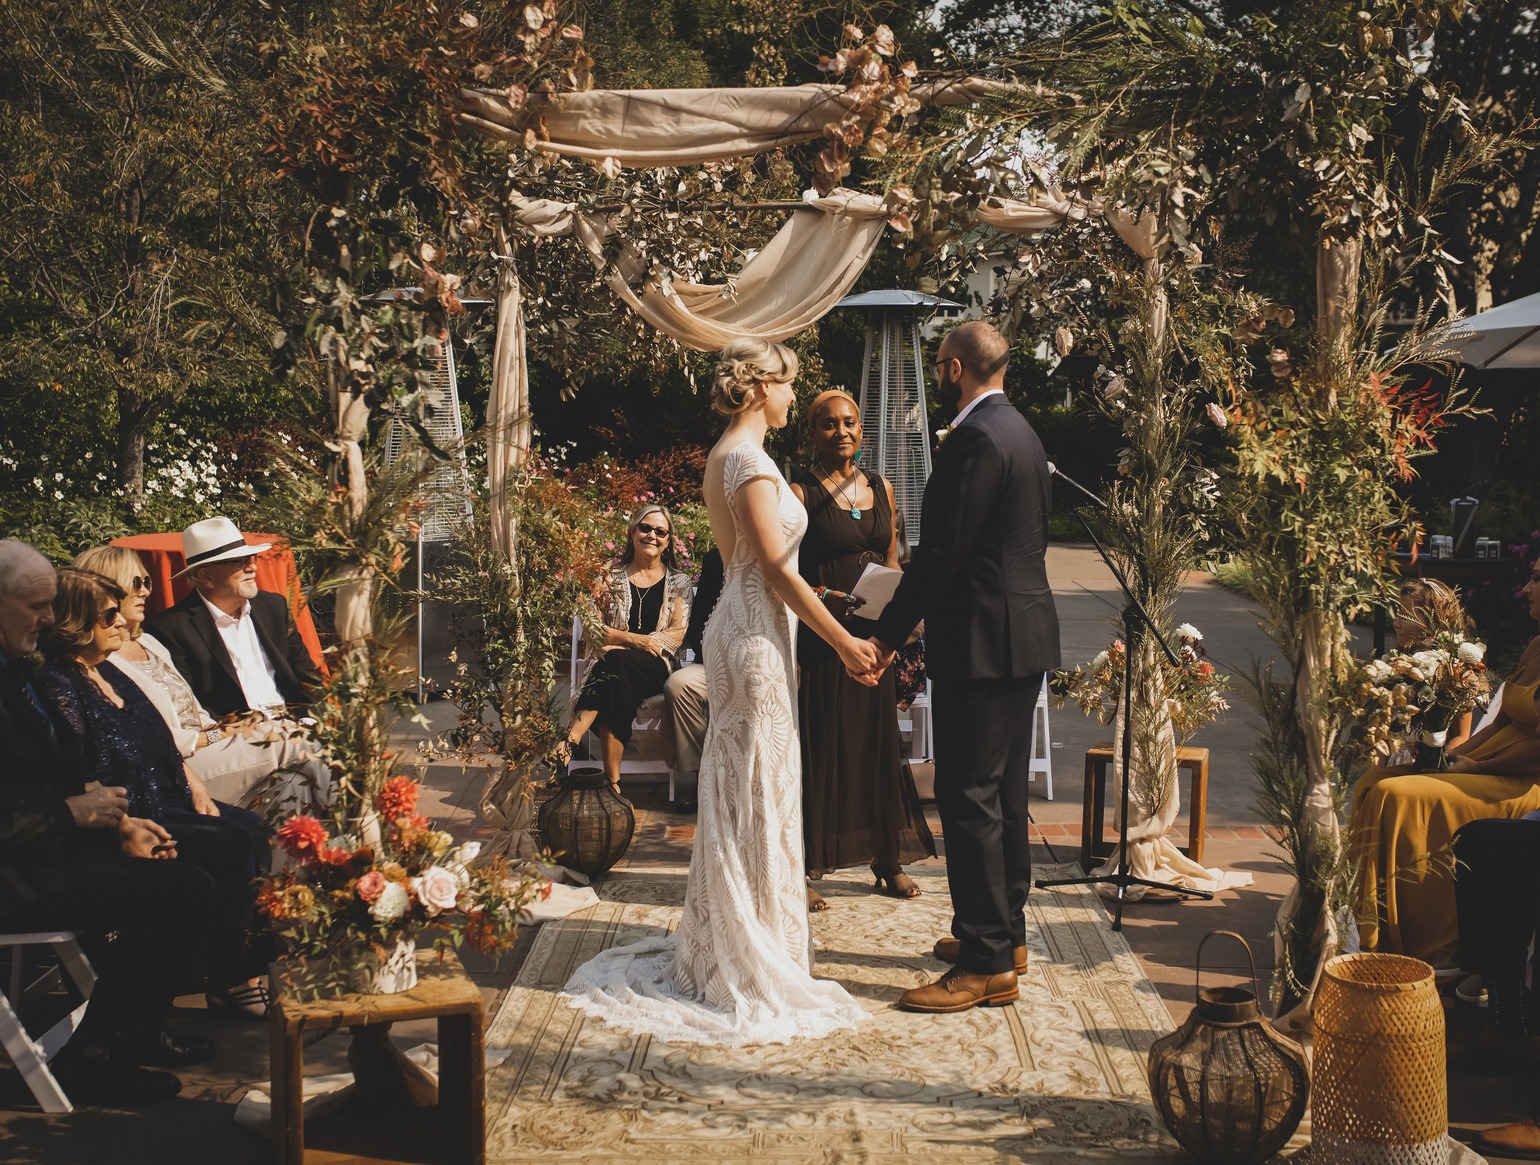 How to Plan an Awesome Micro Wedding- Save Money with an Intimate Celebration